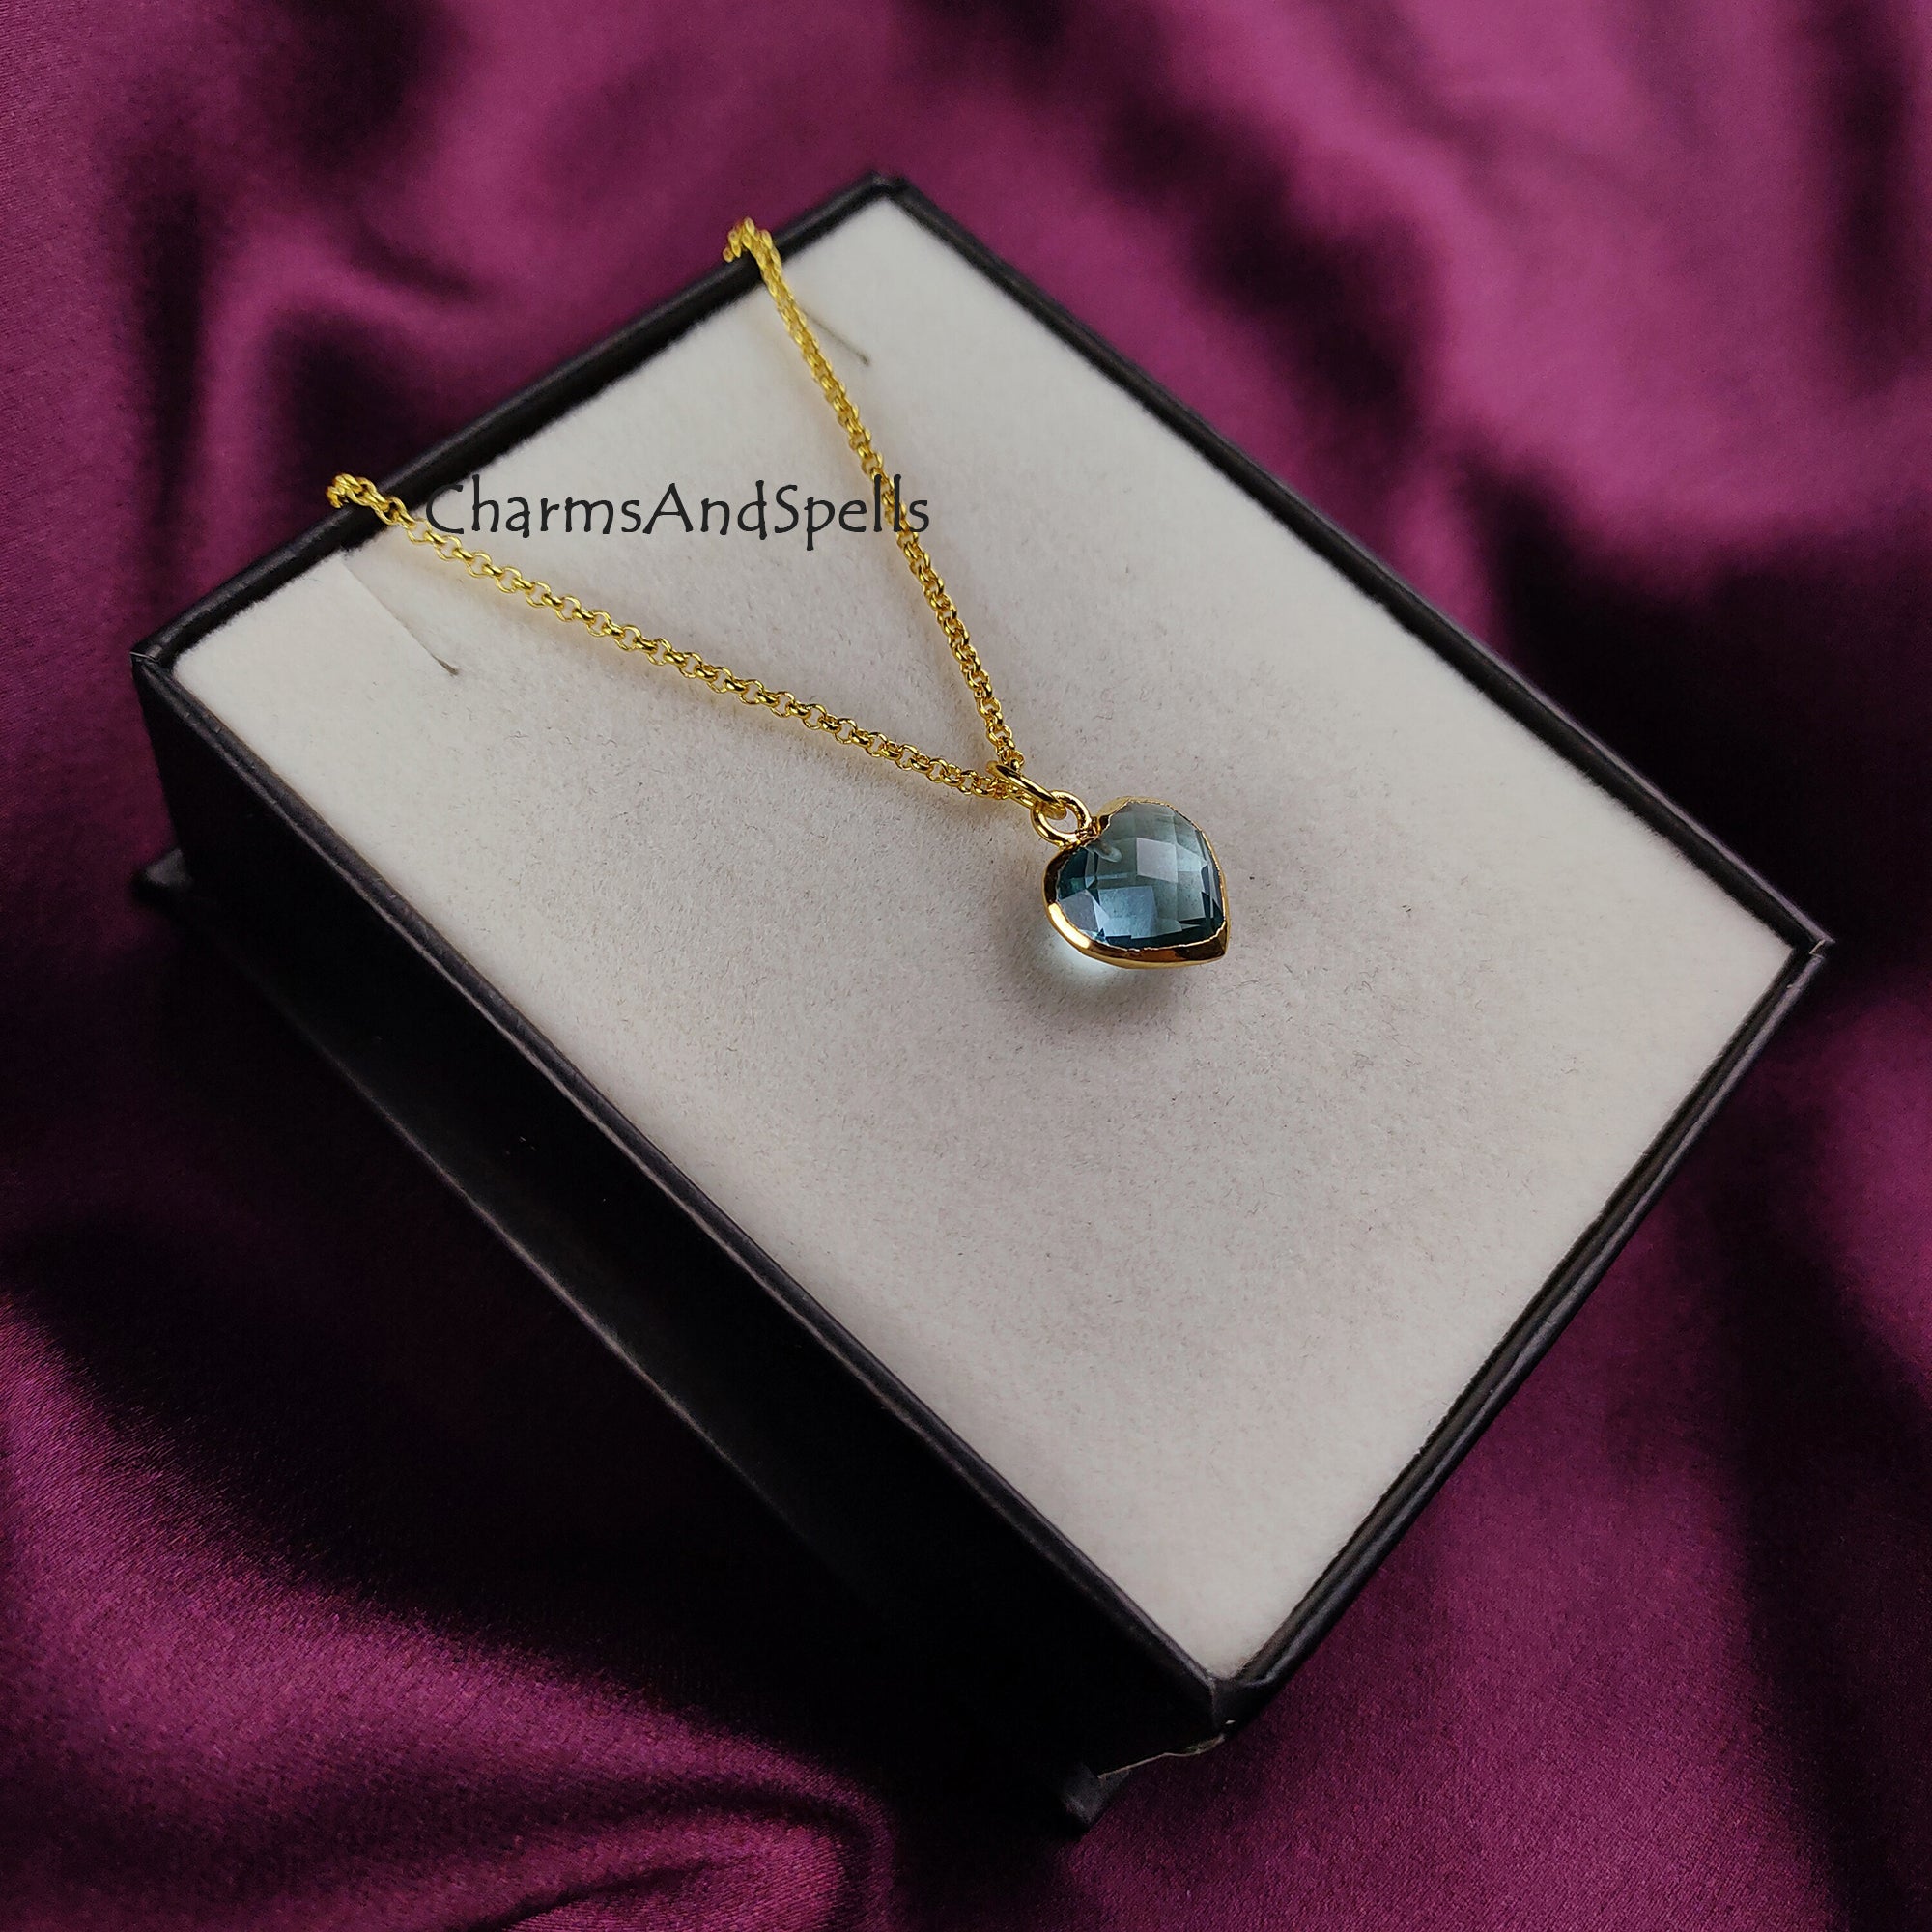 Blue Topaz Necklace, Personalized Heart Shape Necklace, Topaz Jewelry, Electroplated Necklace, Gift For Her, Mother Day Sale, Gift Idea